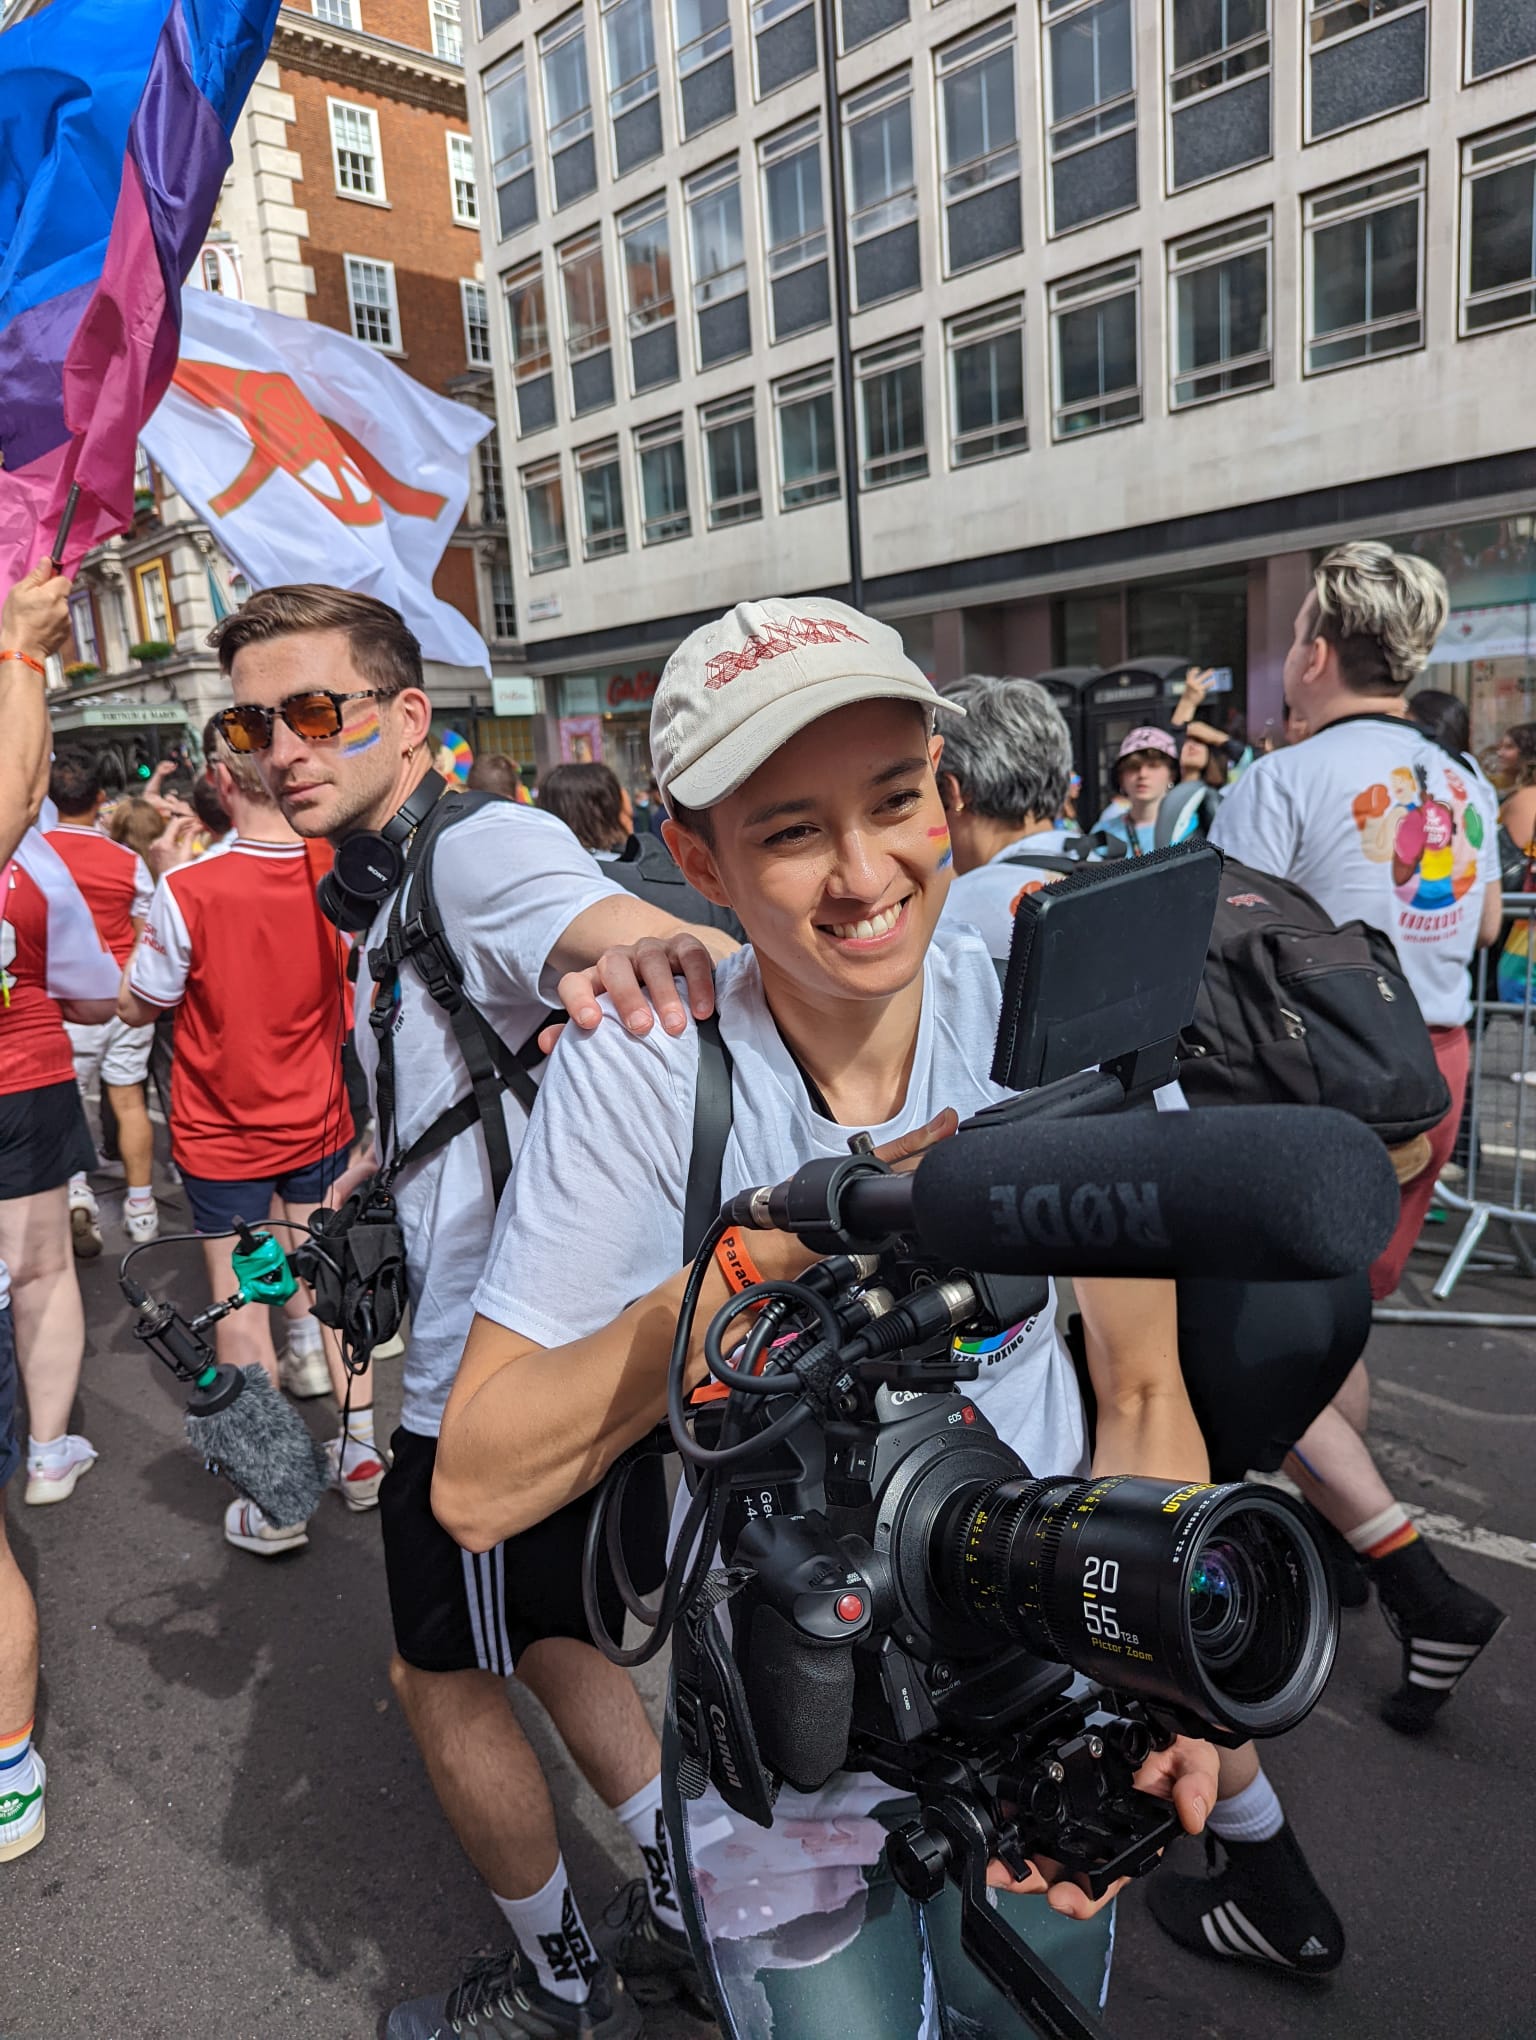 The crew, specifically Tom and his cameraperrson, film at Pride.